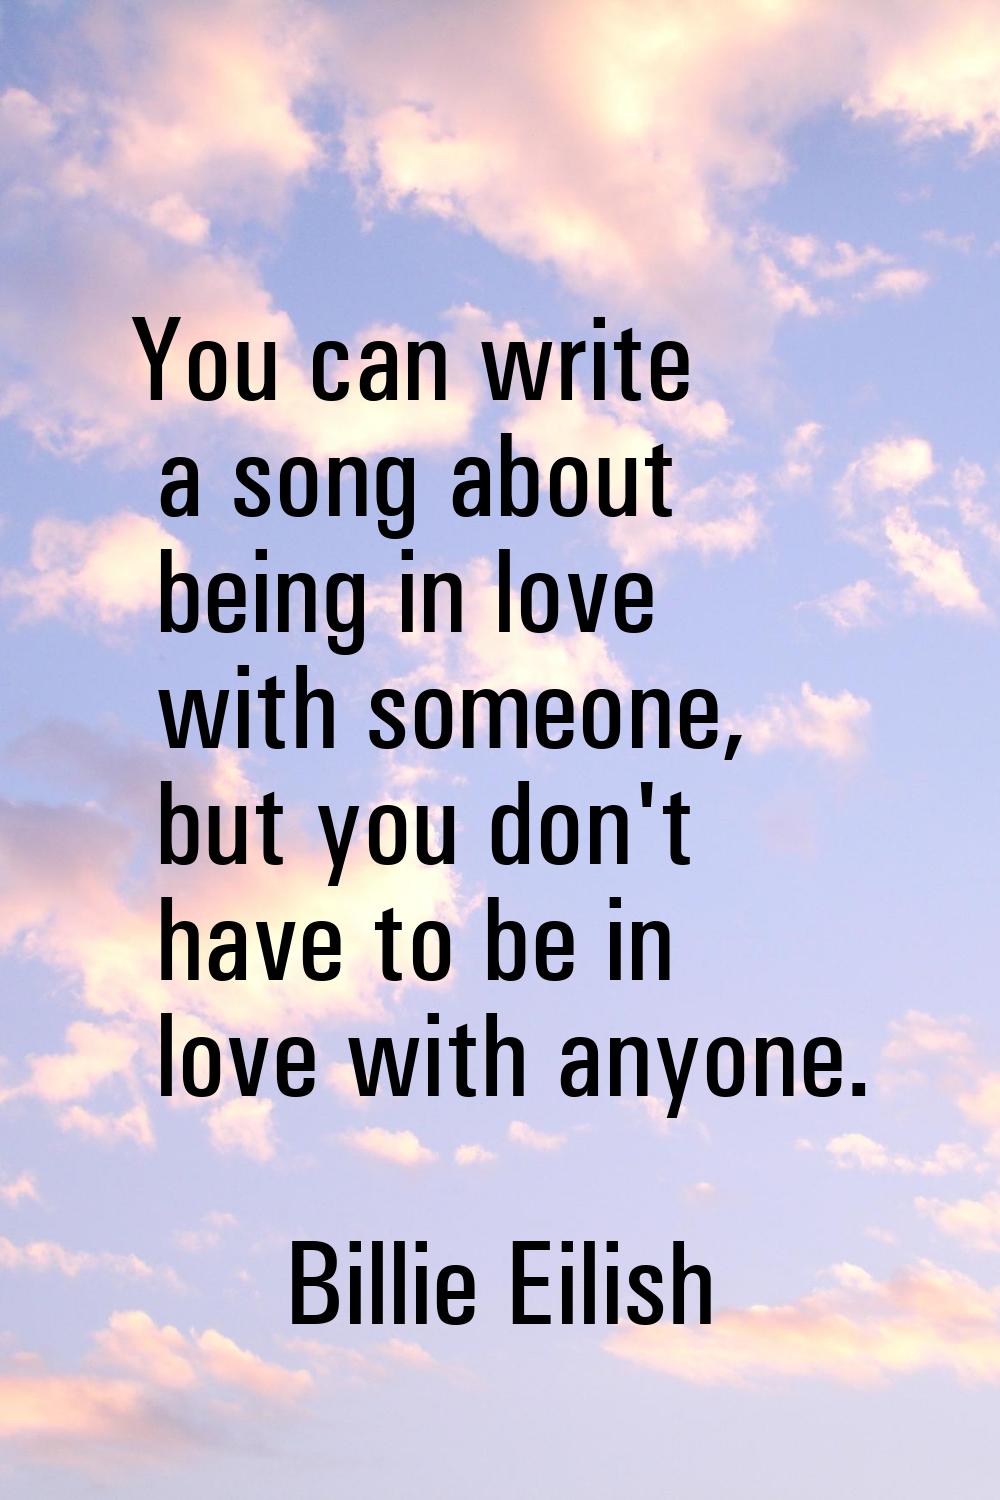 You can write a song about being in love with someone, but you don't have to be in love with anyone